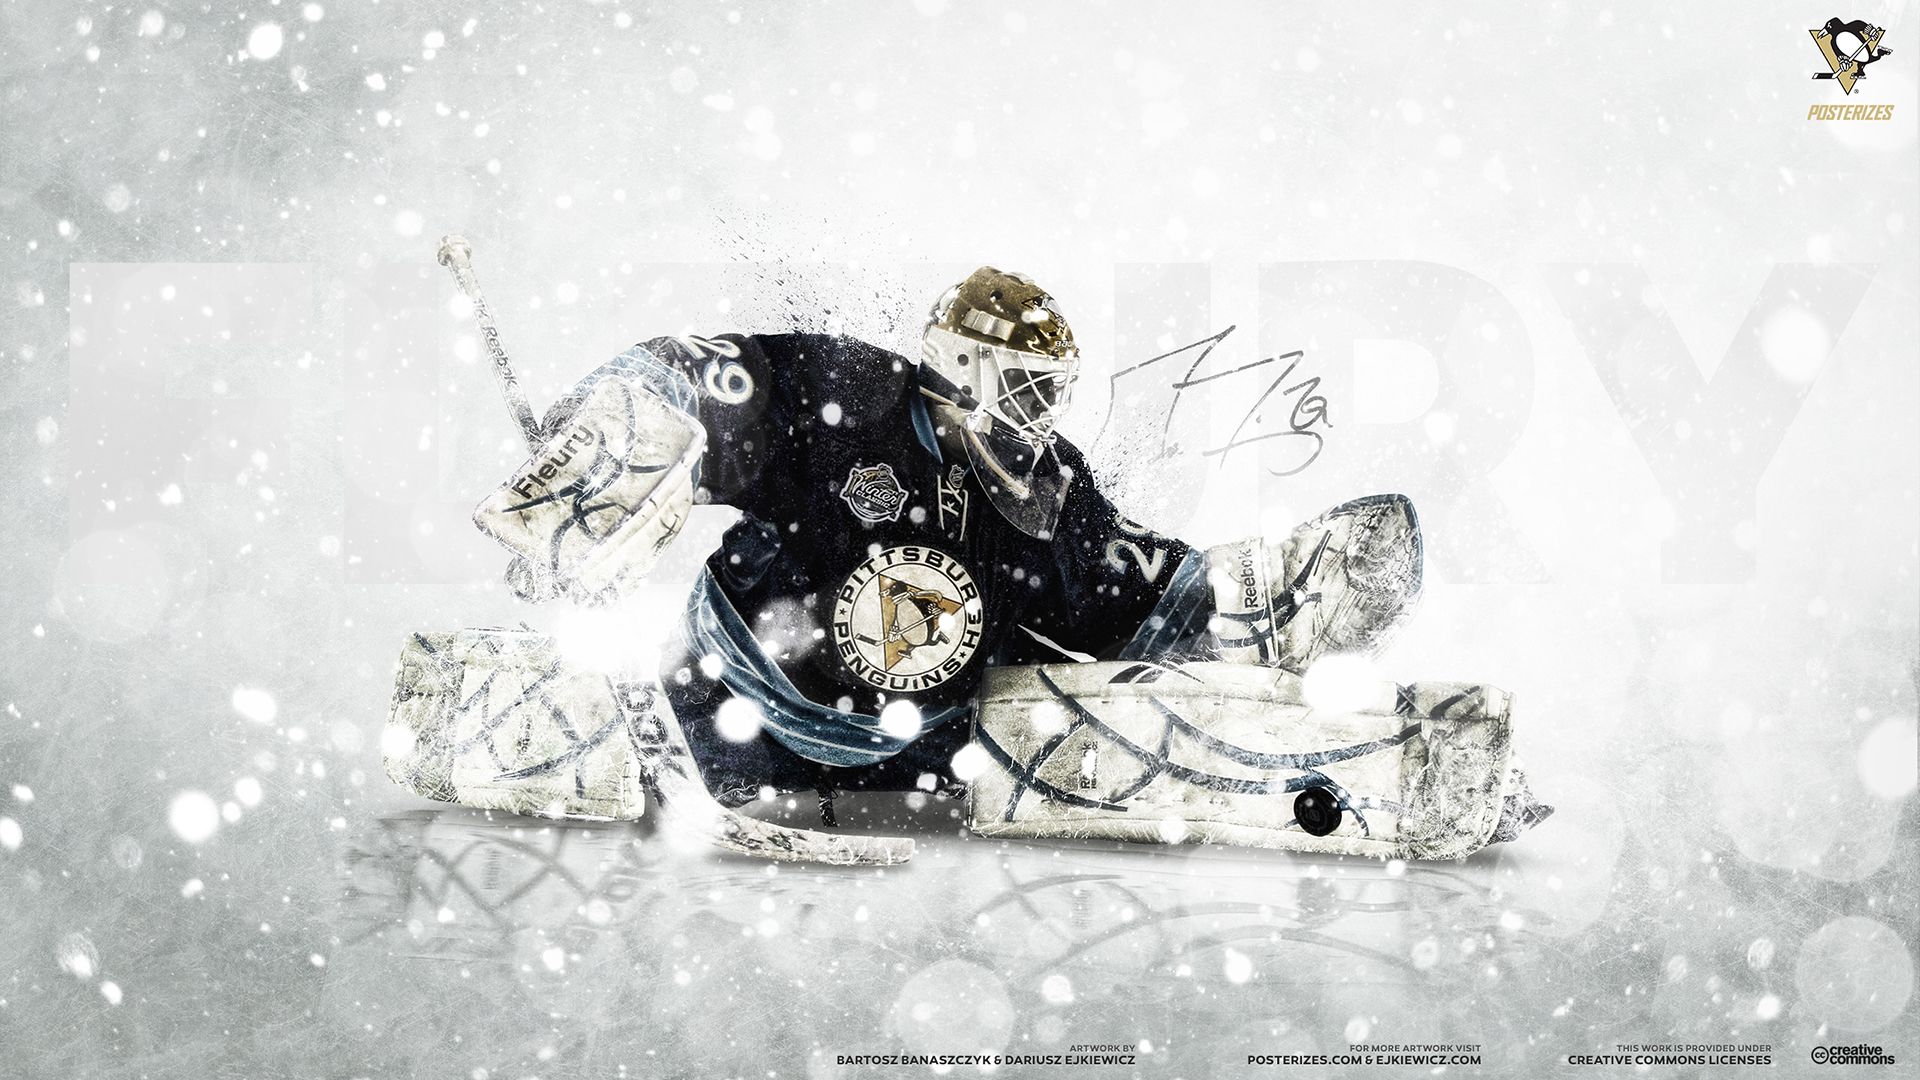 100% Quality Hd Images Collection Of Pittsburgh Penguins - Hockey Wallpaper Nhl Goalie - HD Wallpaper 